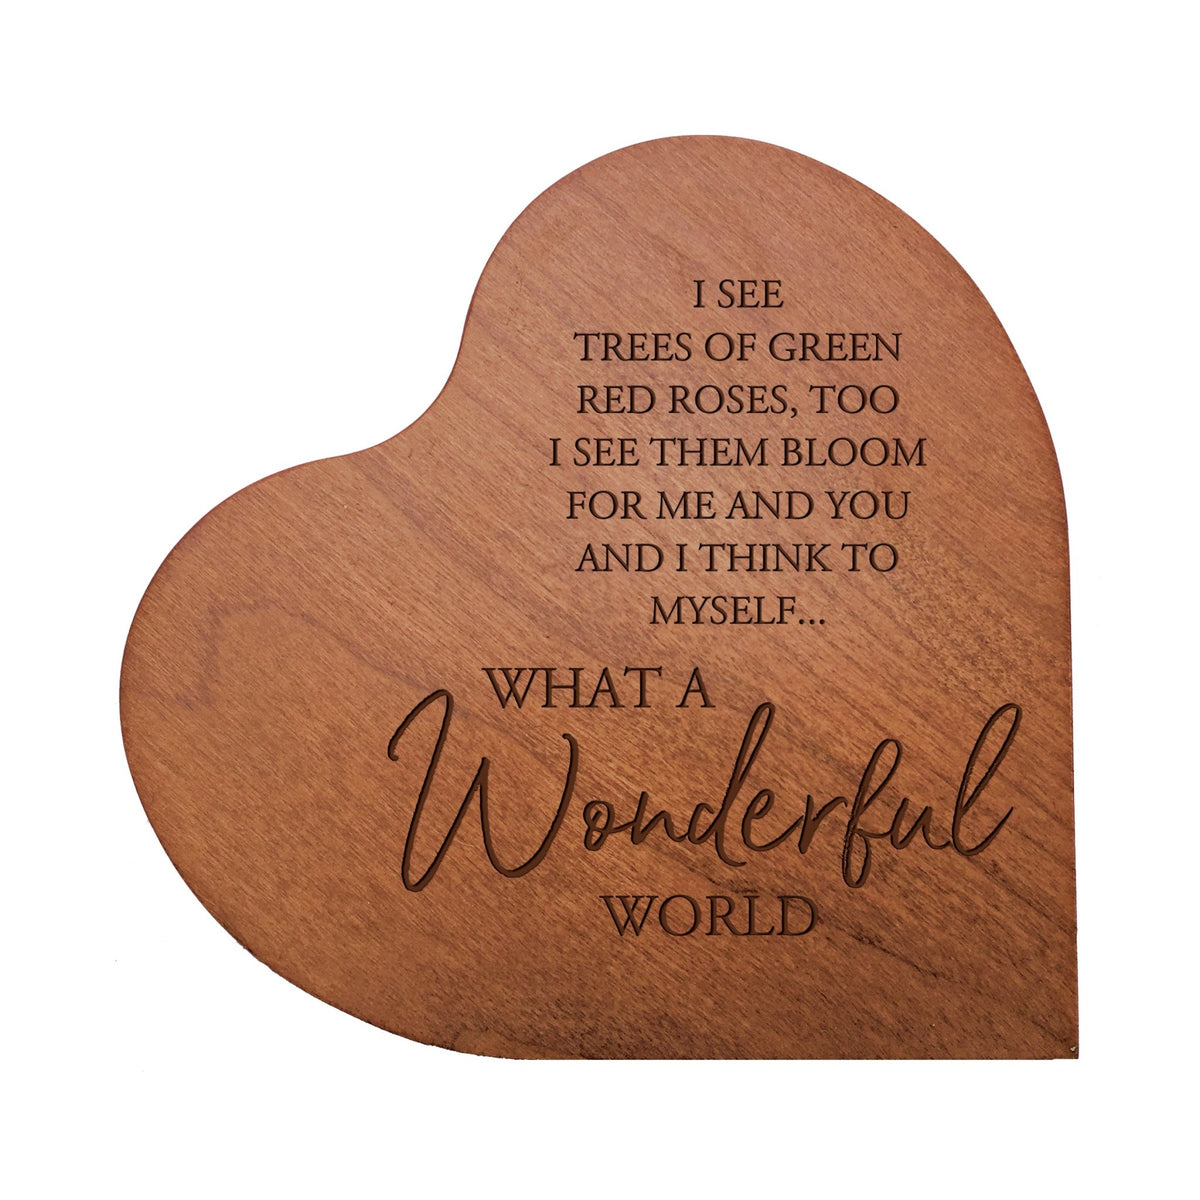 Engraved Wooden Inspirational Heart Block 5” x 5.25” x 0.75” - I See Trees Of Green - LifeSong Milestones